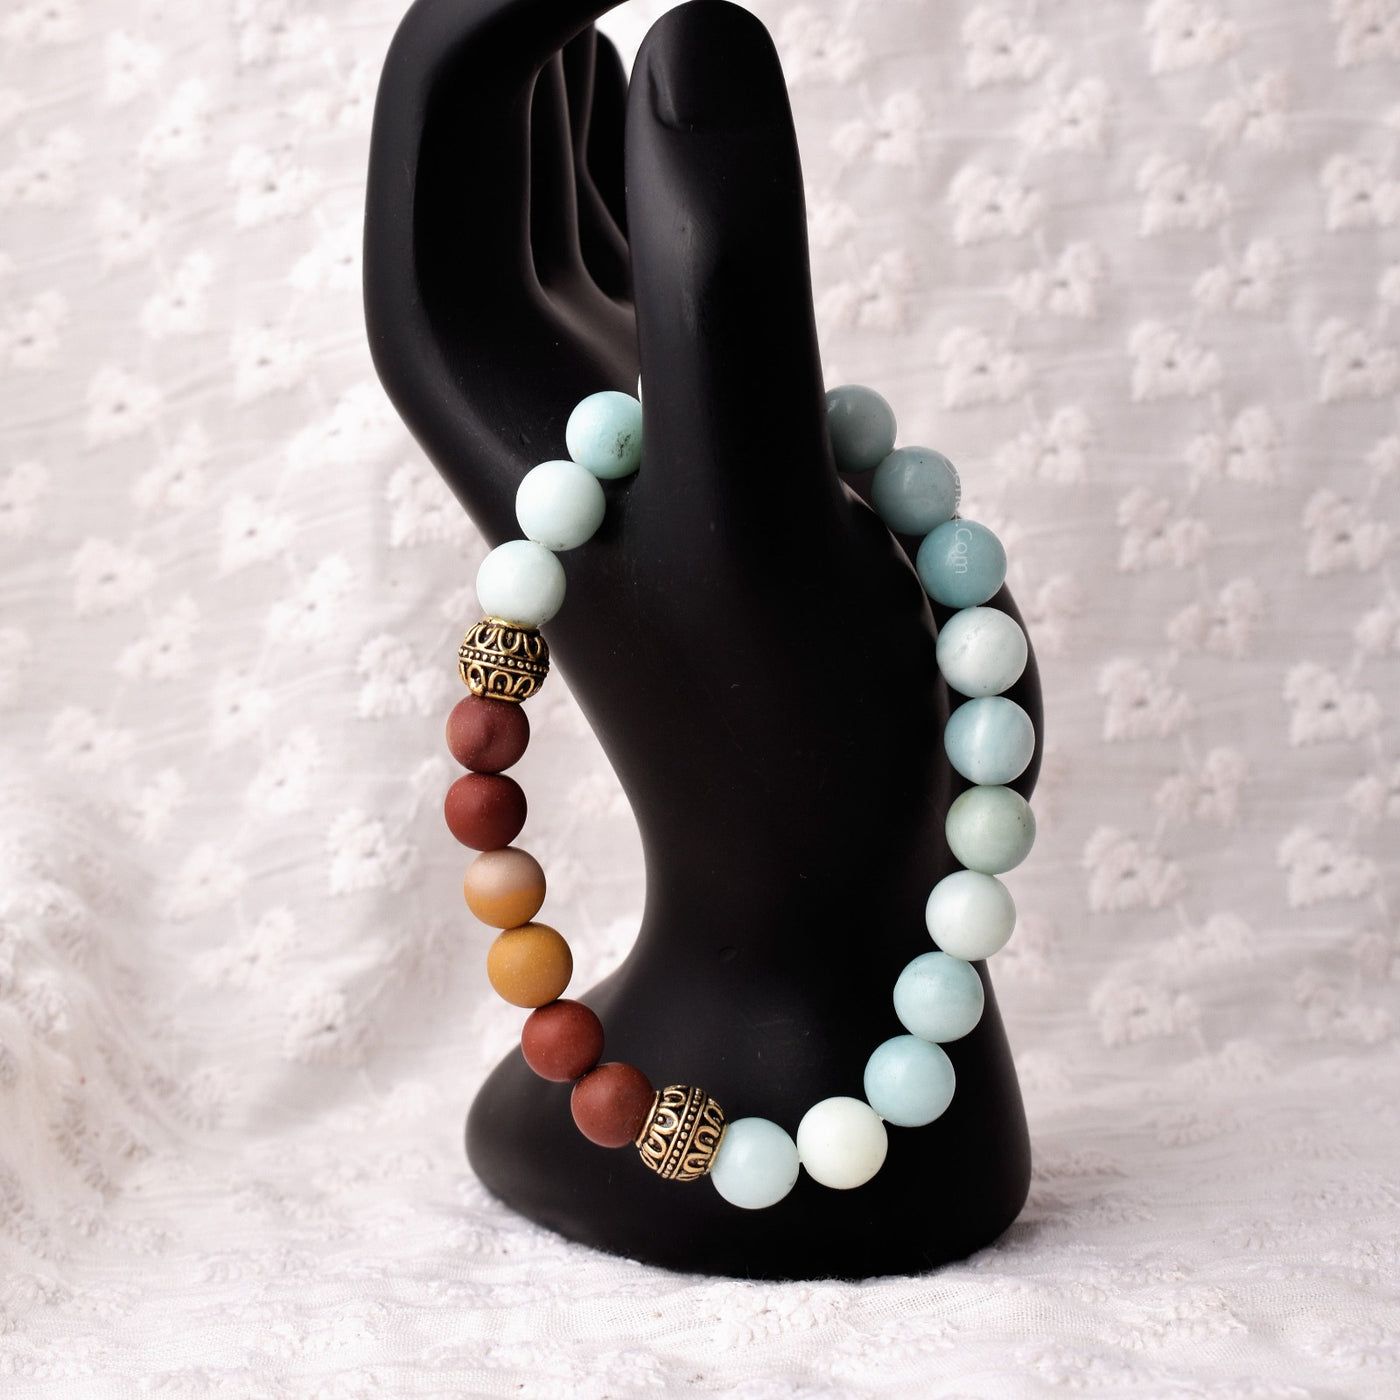 Round Beaded Stretch Bracelet, 8mm Round Smooth Aqua Marine Beads, Mookite Beads With Real Gold Plated Beads.